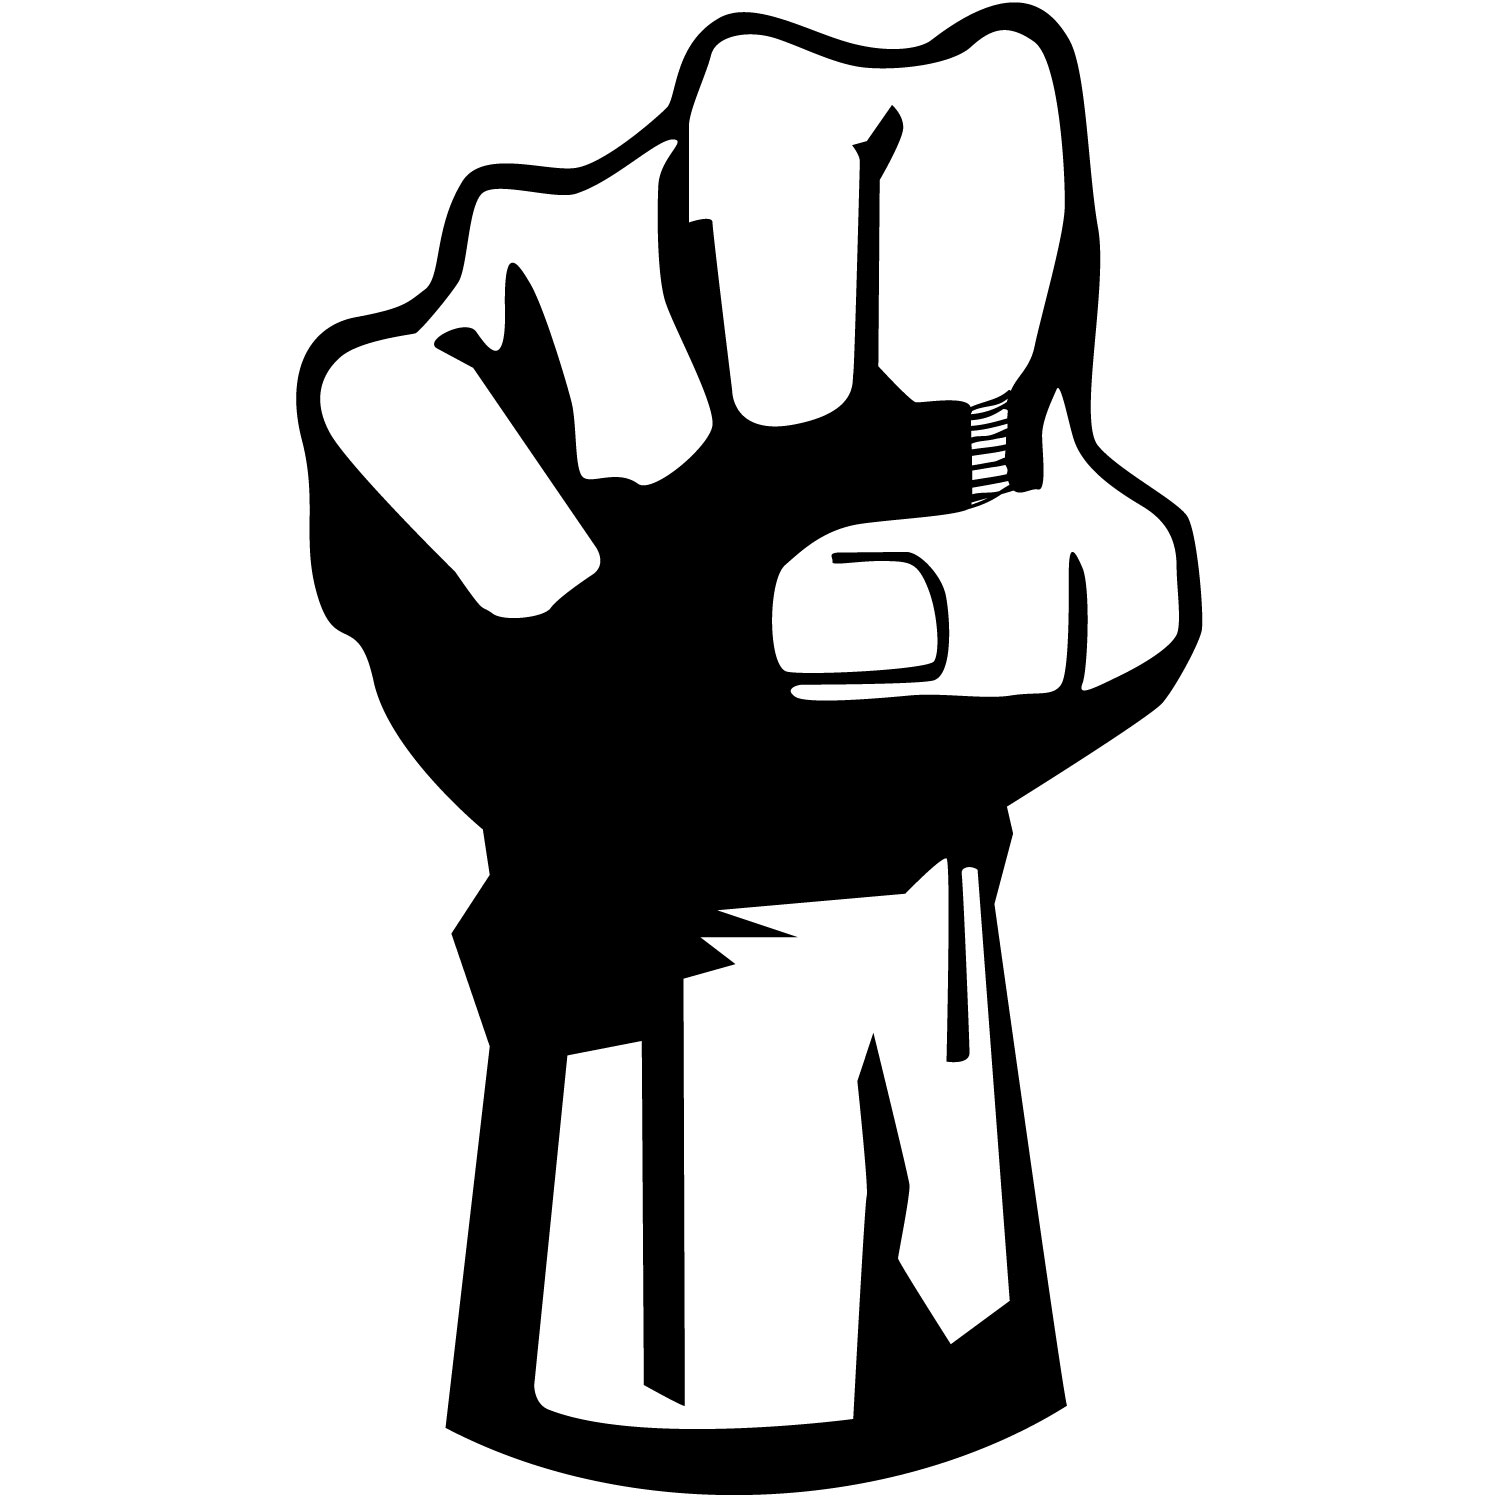 Fist Image - Clipart library